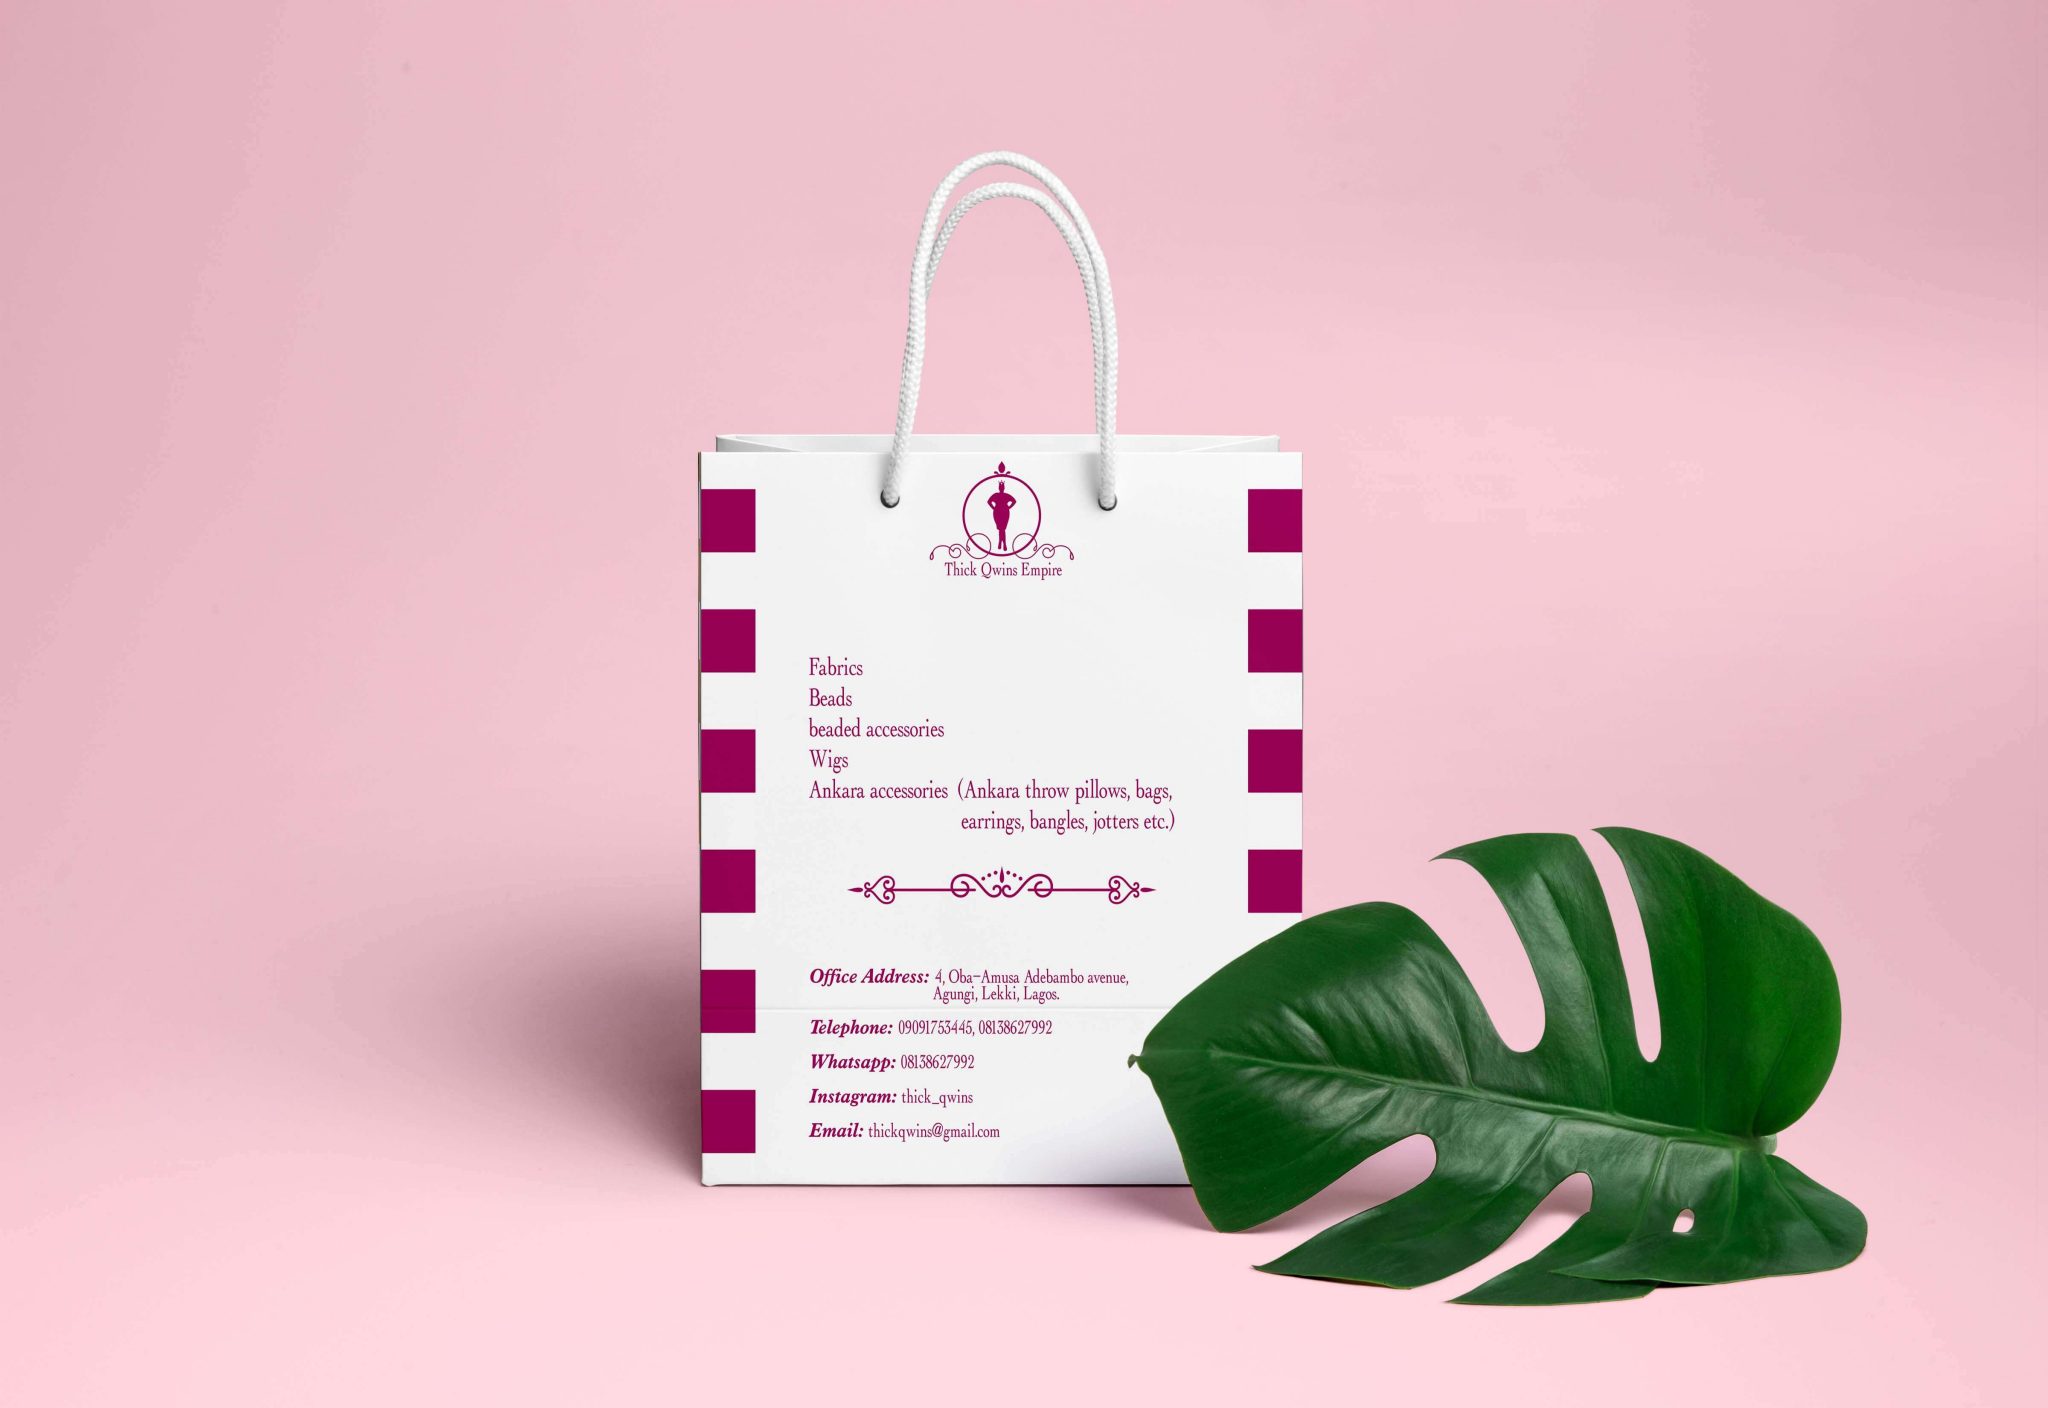 Thick Qwins Empire Carrier Bag Printing and Design